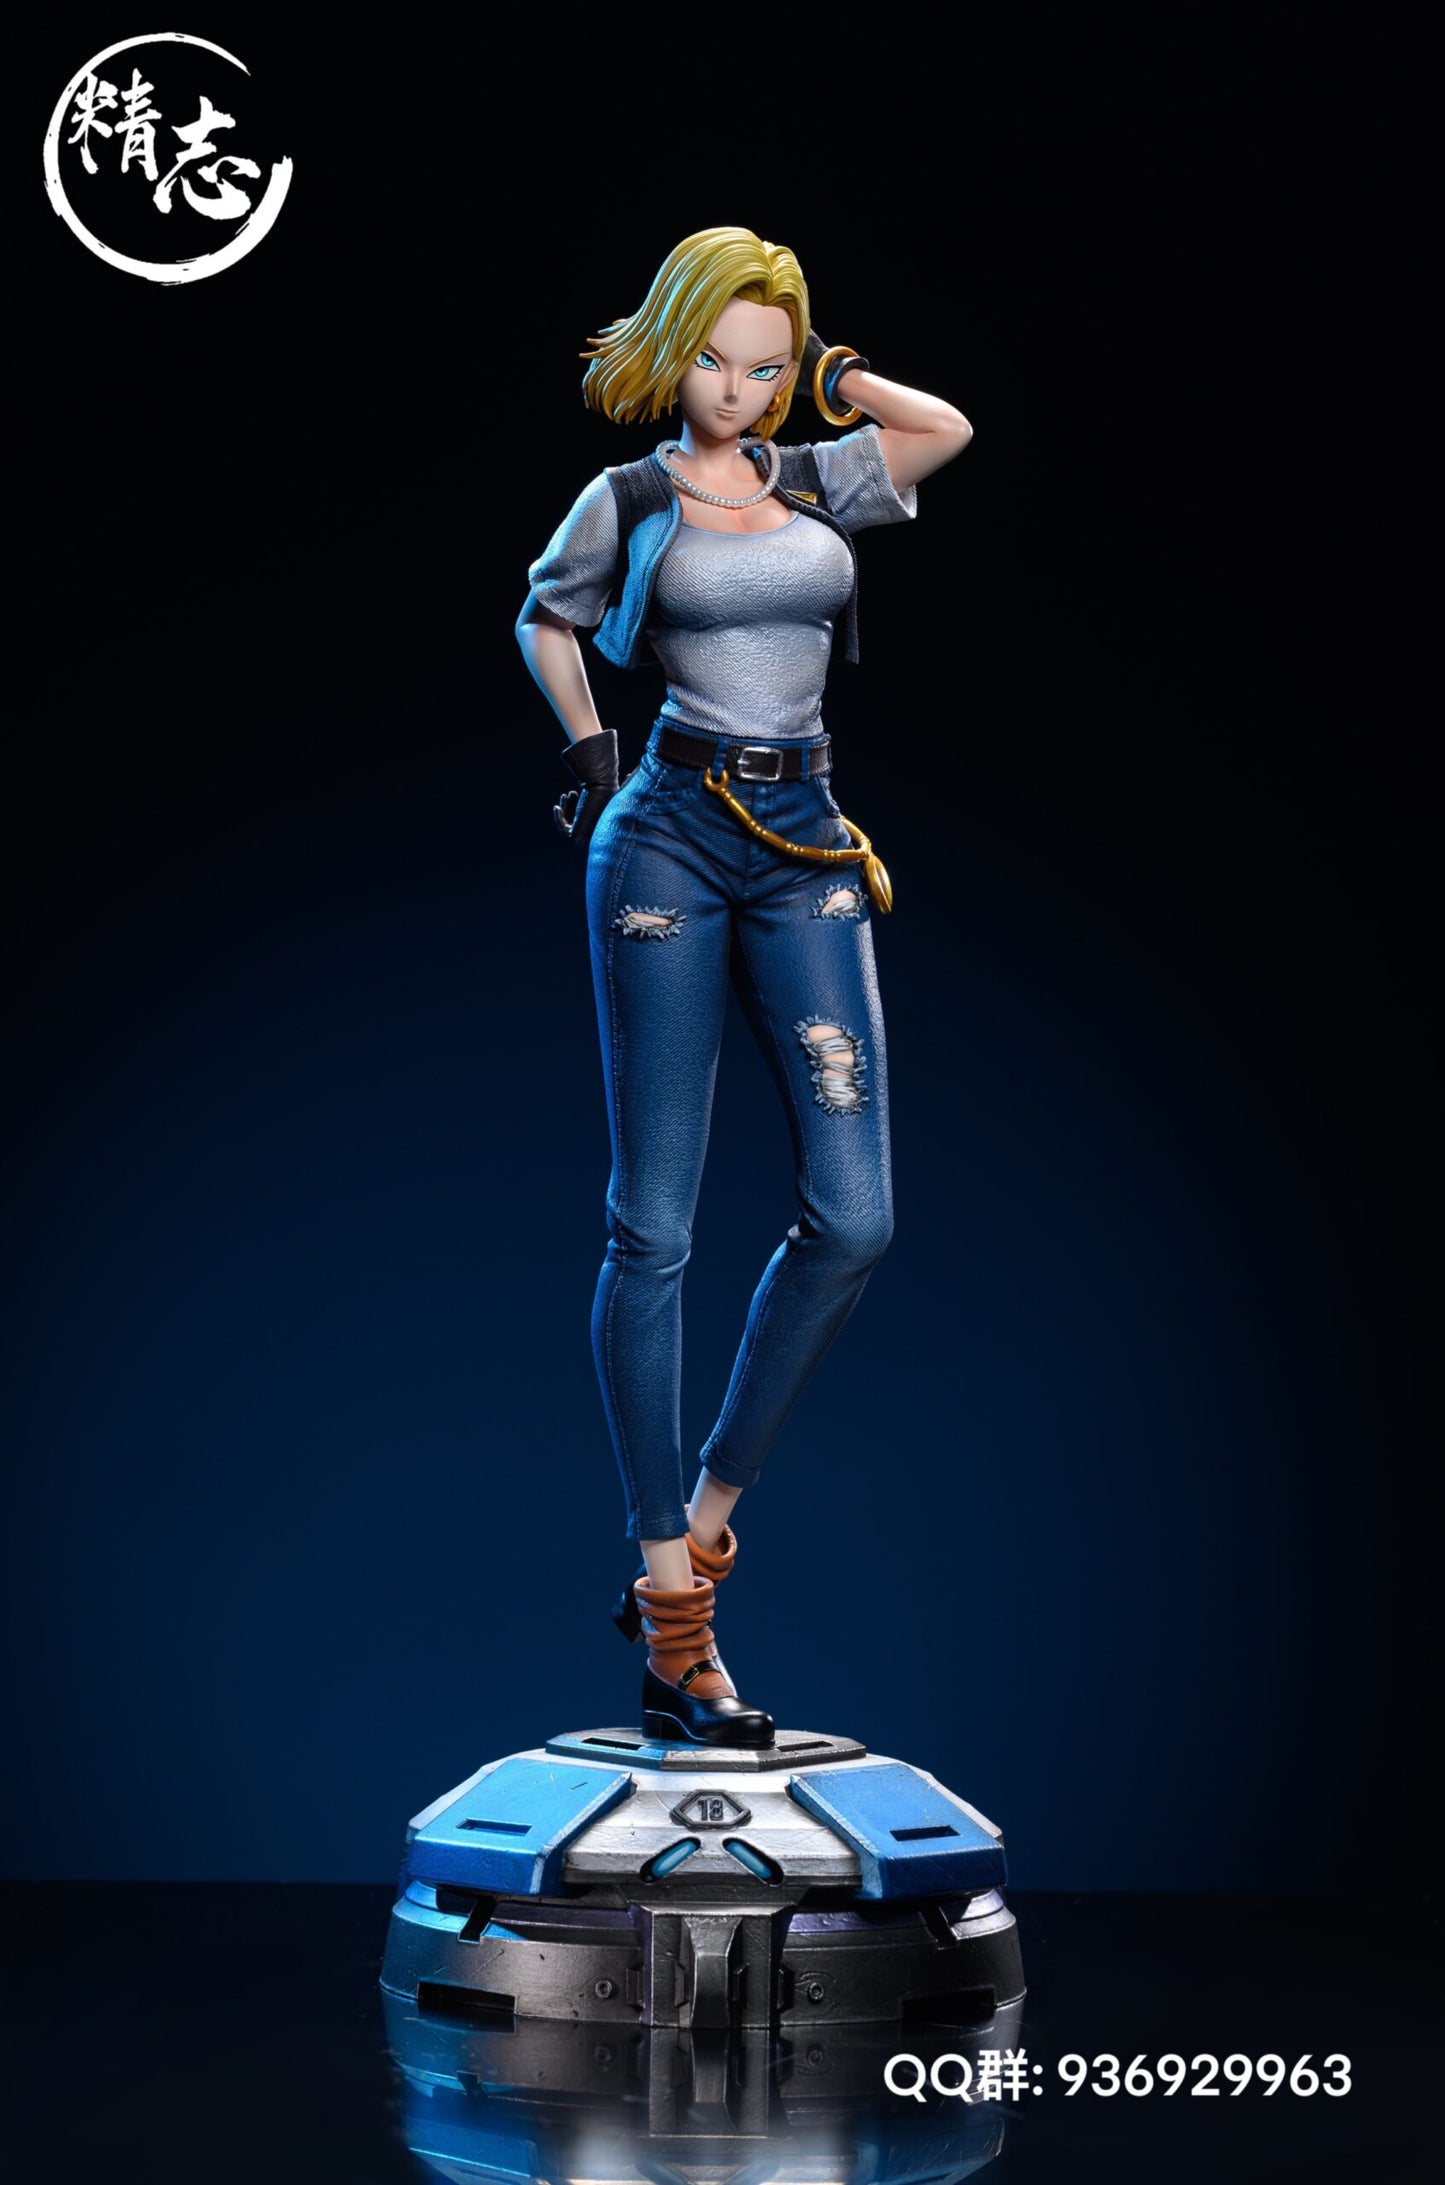 Jing Zhi - Android 18